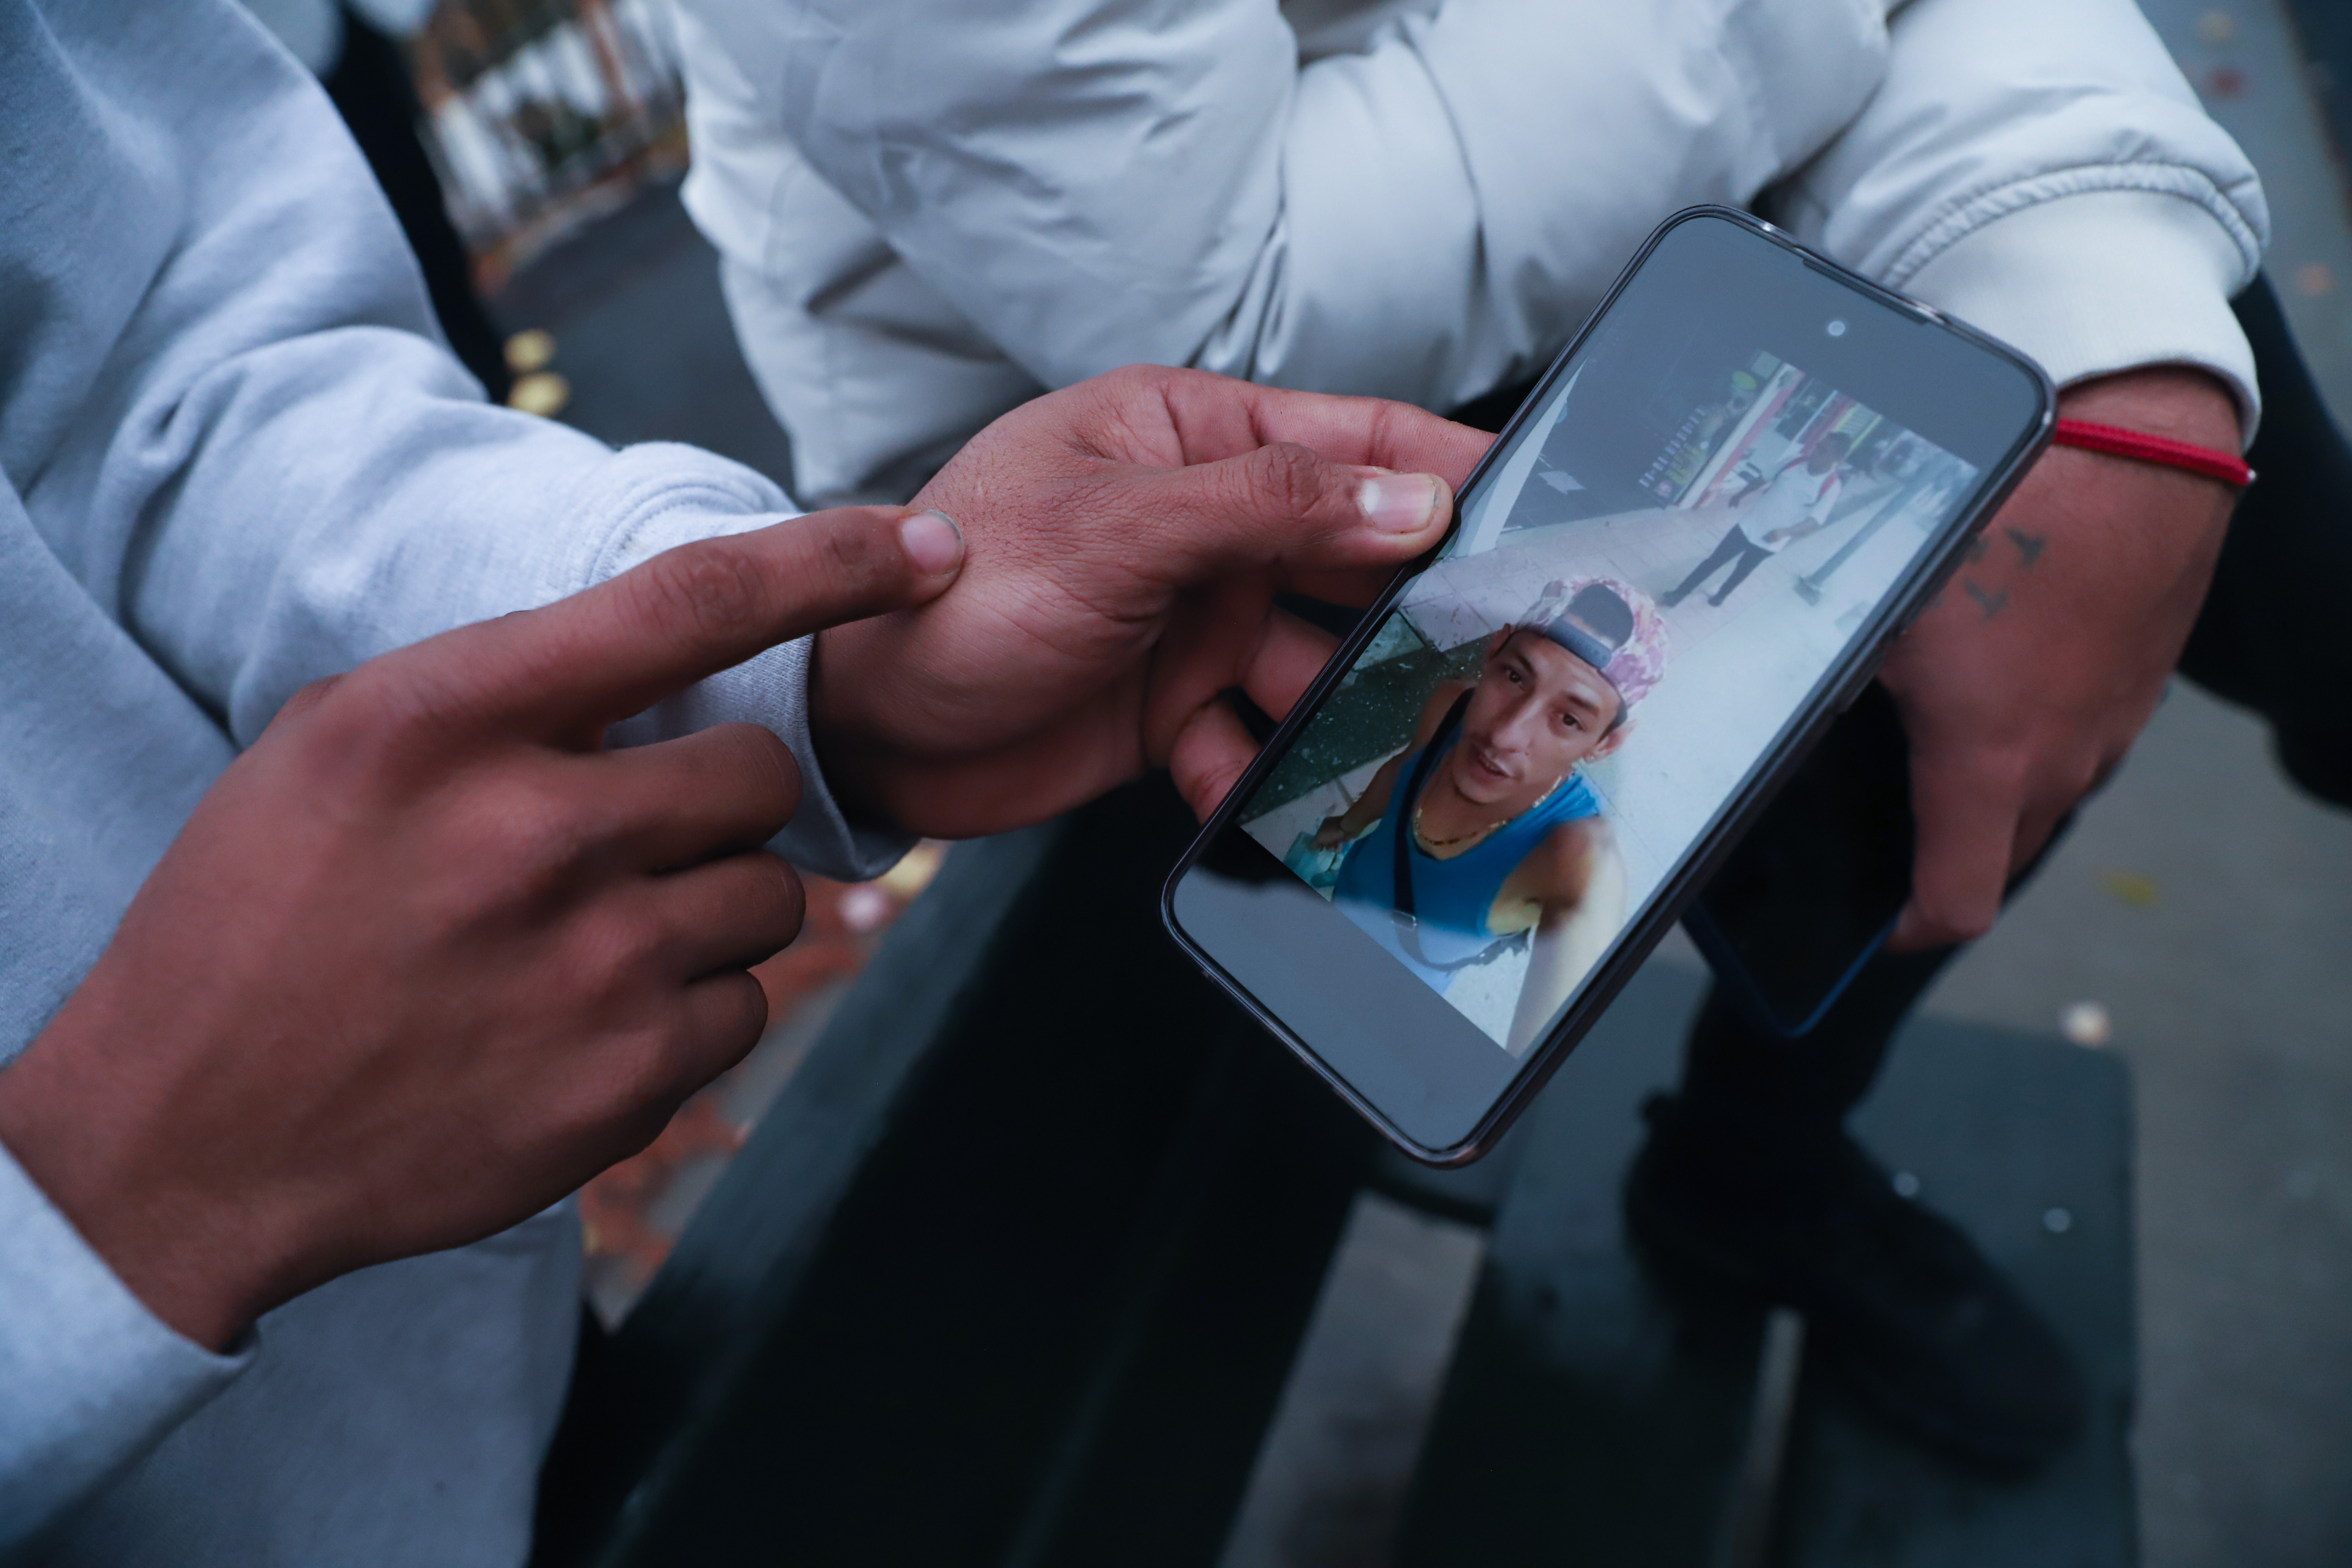 A close-up photo of a mobile phone showing a picture of a young man's face